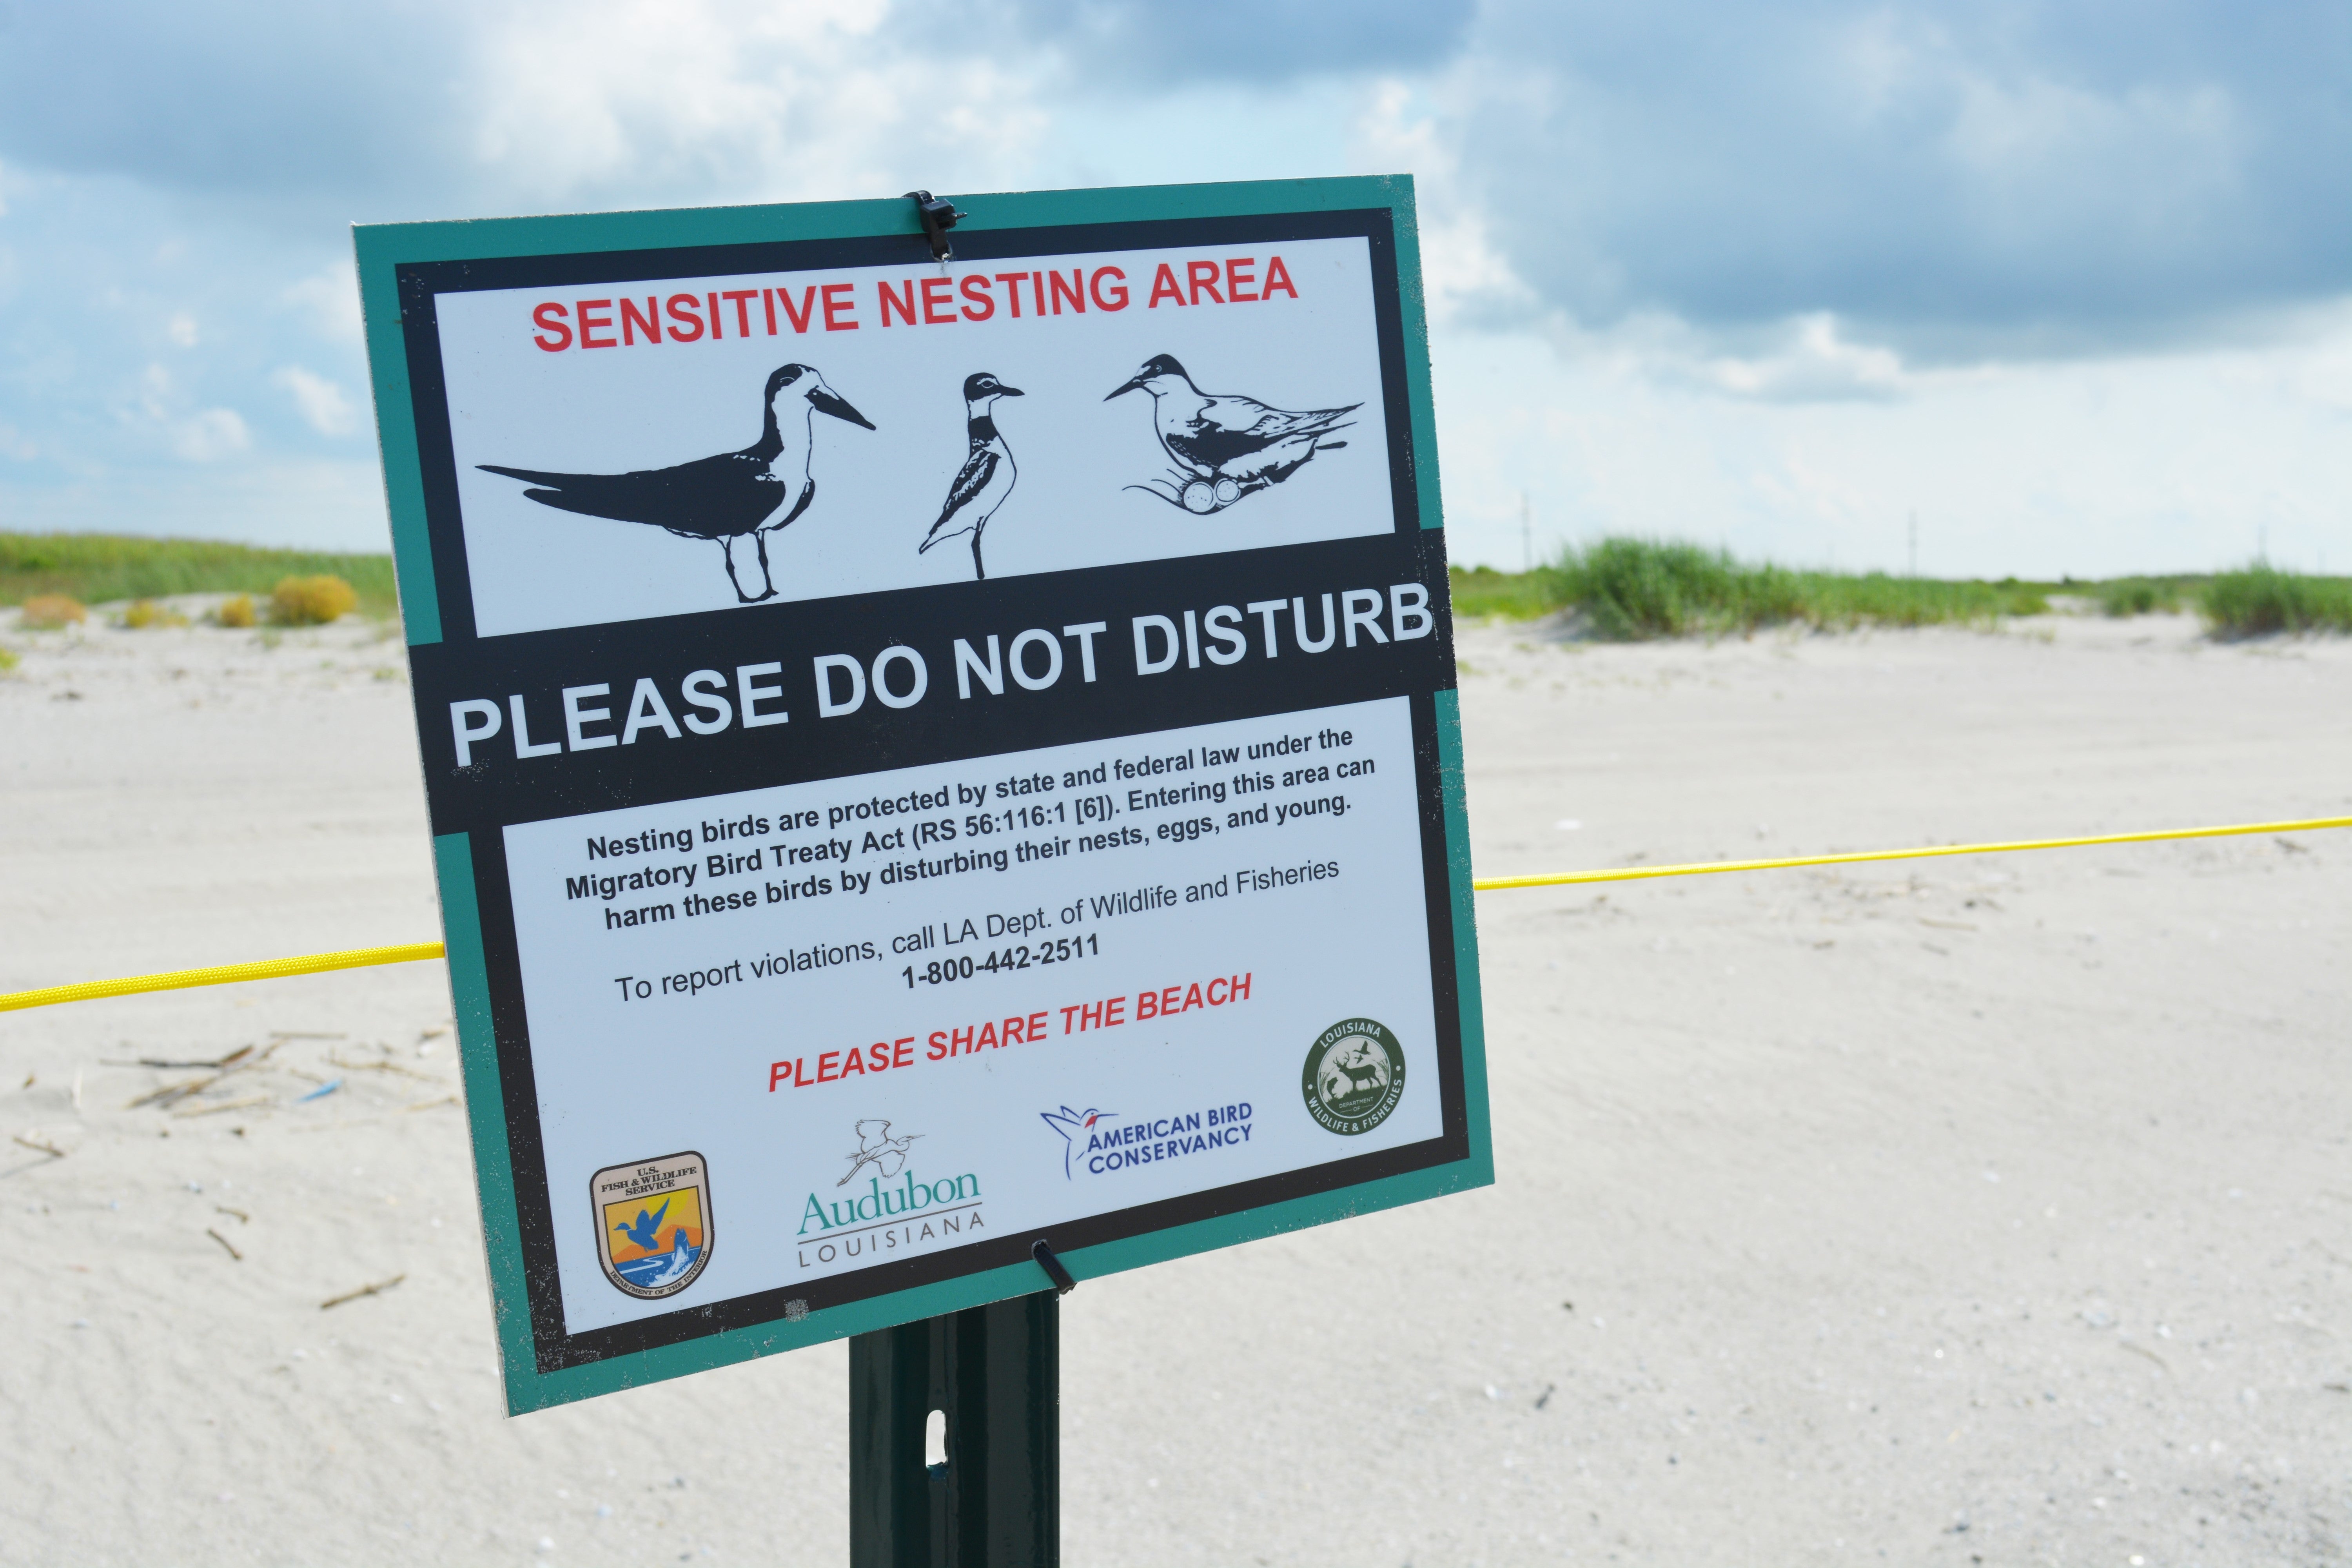 Protective fencing and signage installed around critical nesting sites.